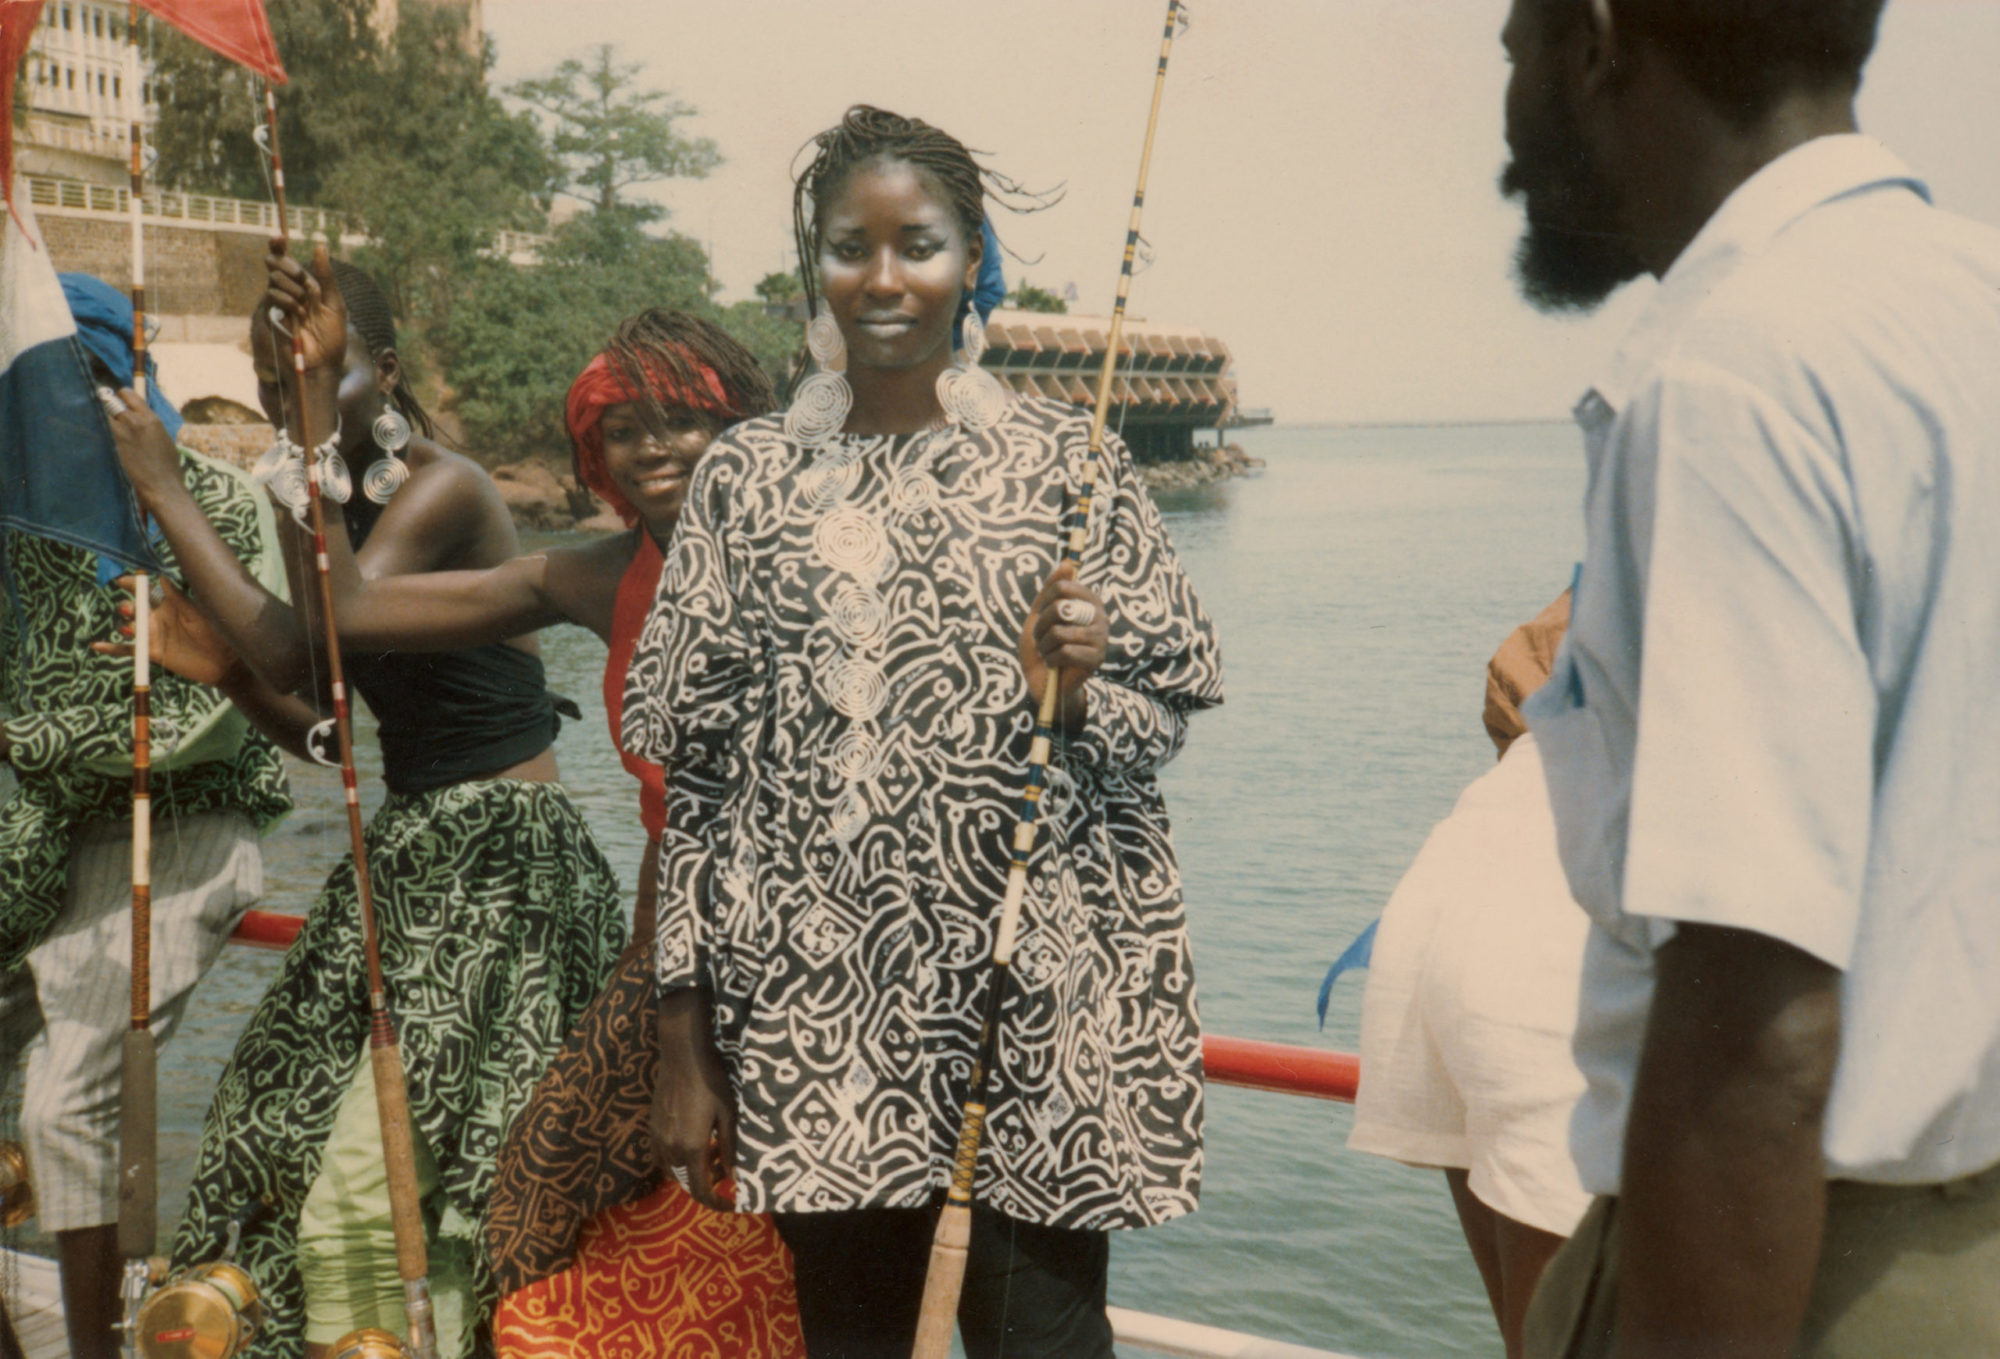 Dancers on a boat wearing vibrant WilliWear garments printed with abstract smiling faces